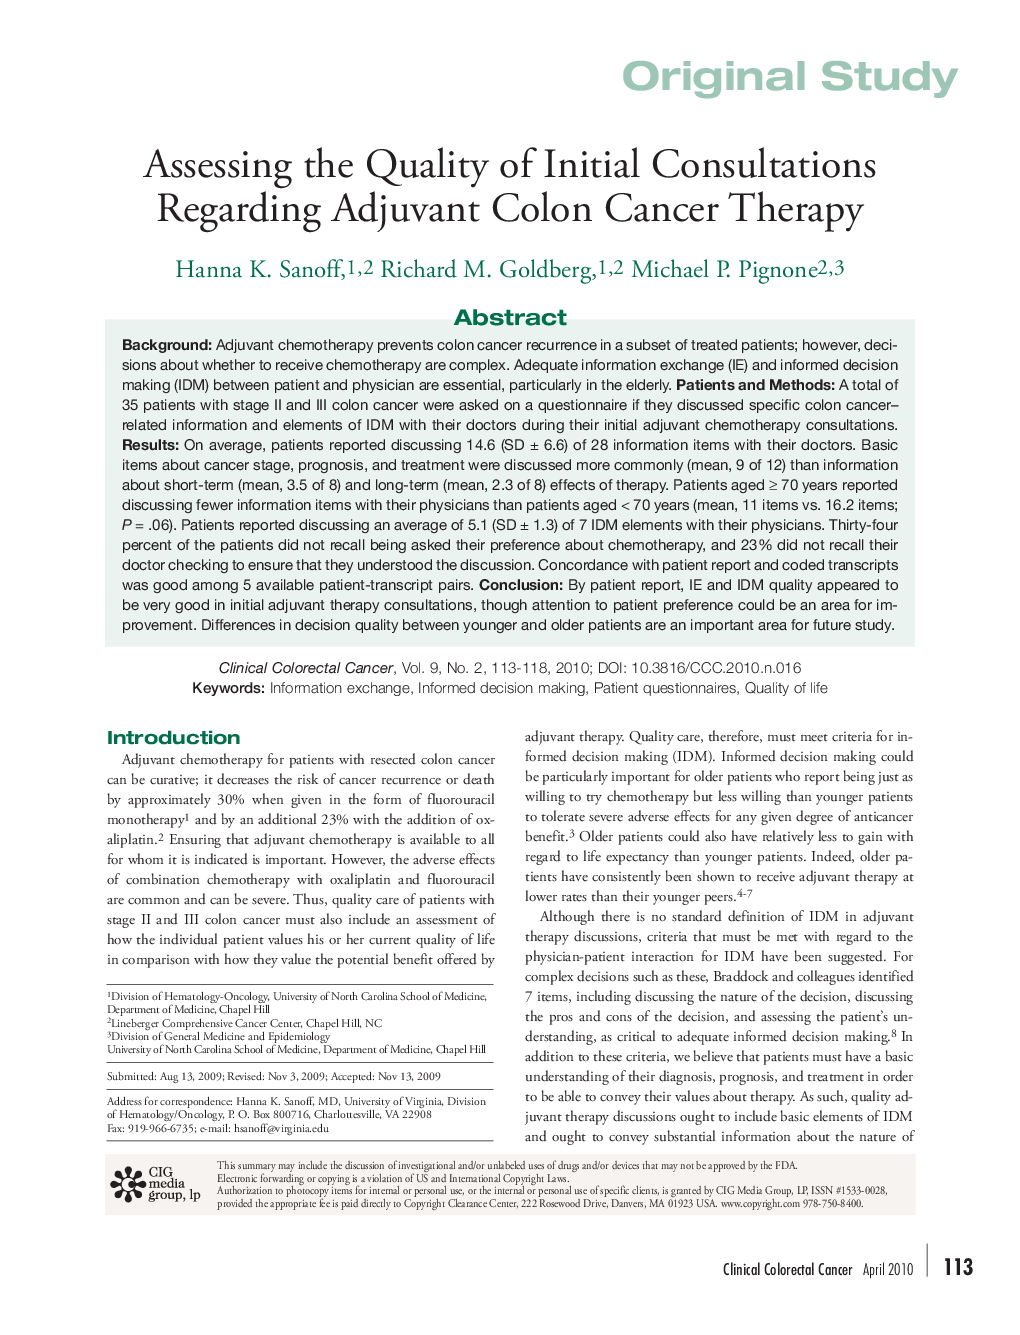 Assessing the Quality of Initial Consultations Regarding Adjuvant Colon Cancer Therapy 